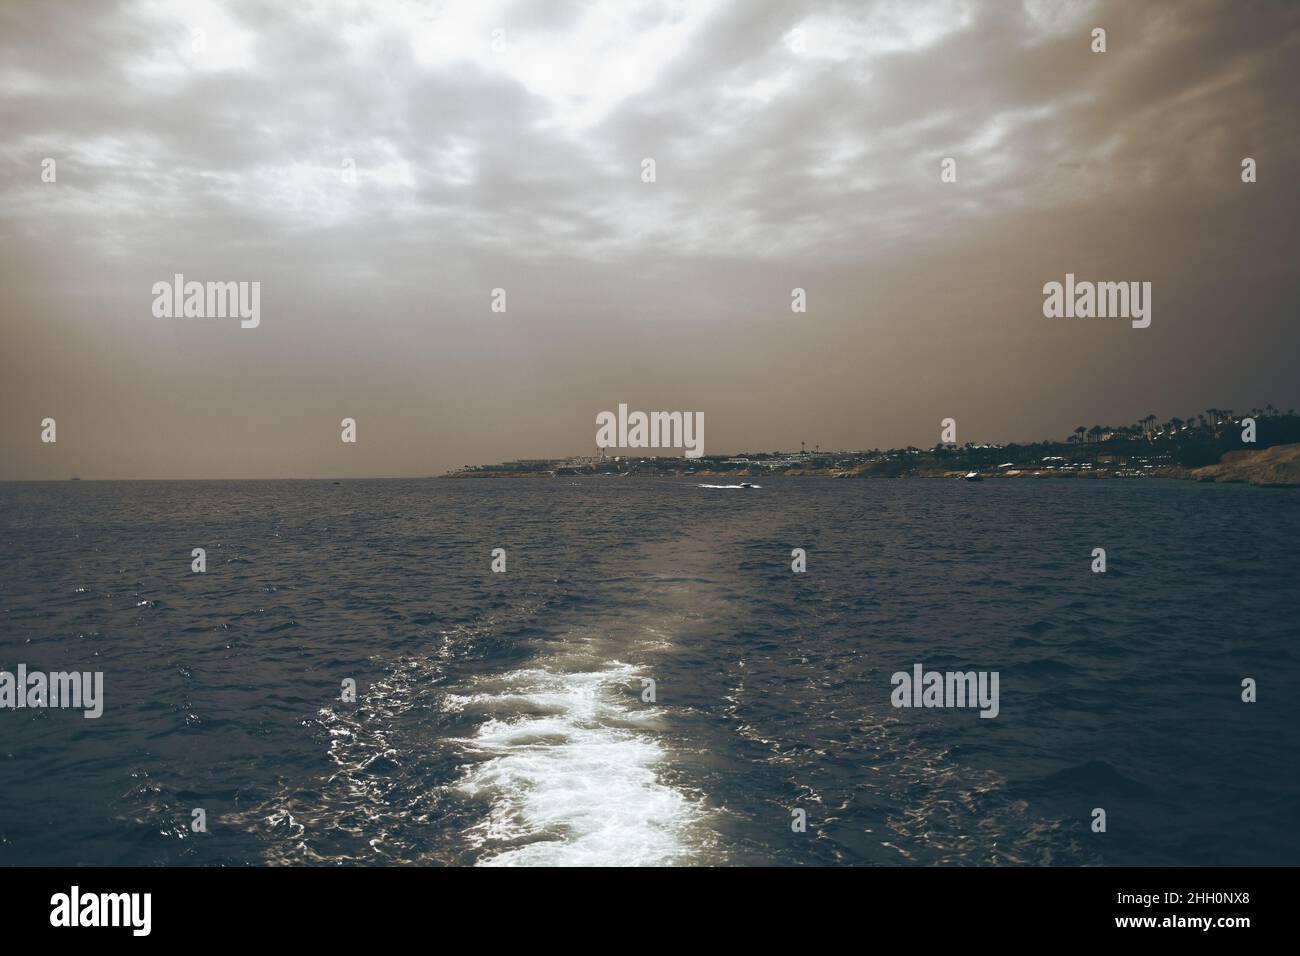 Wake on the sea surface after a cabin boat. Stock Photo